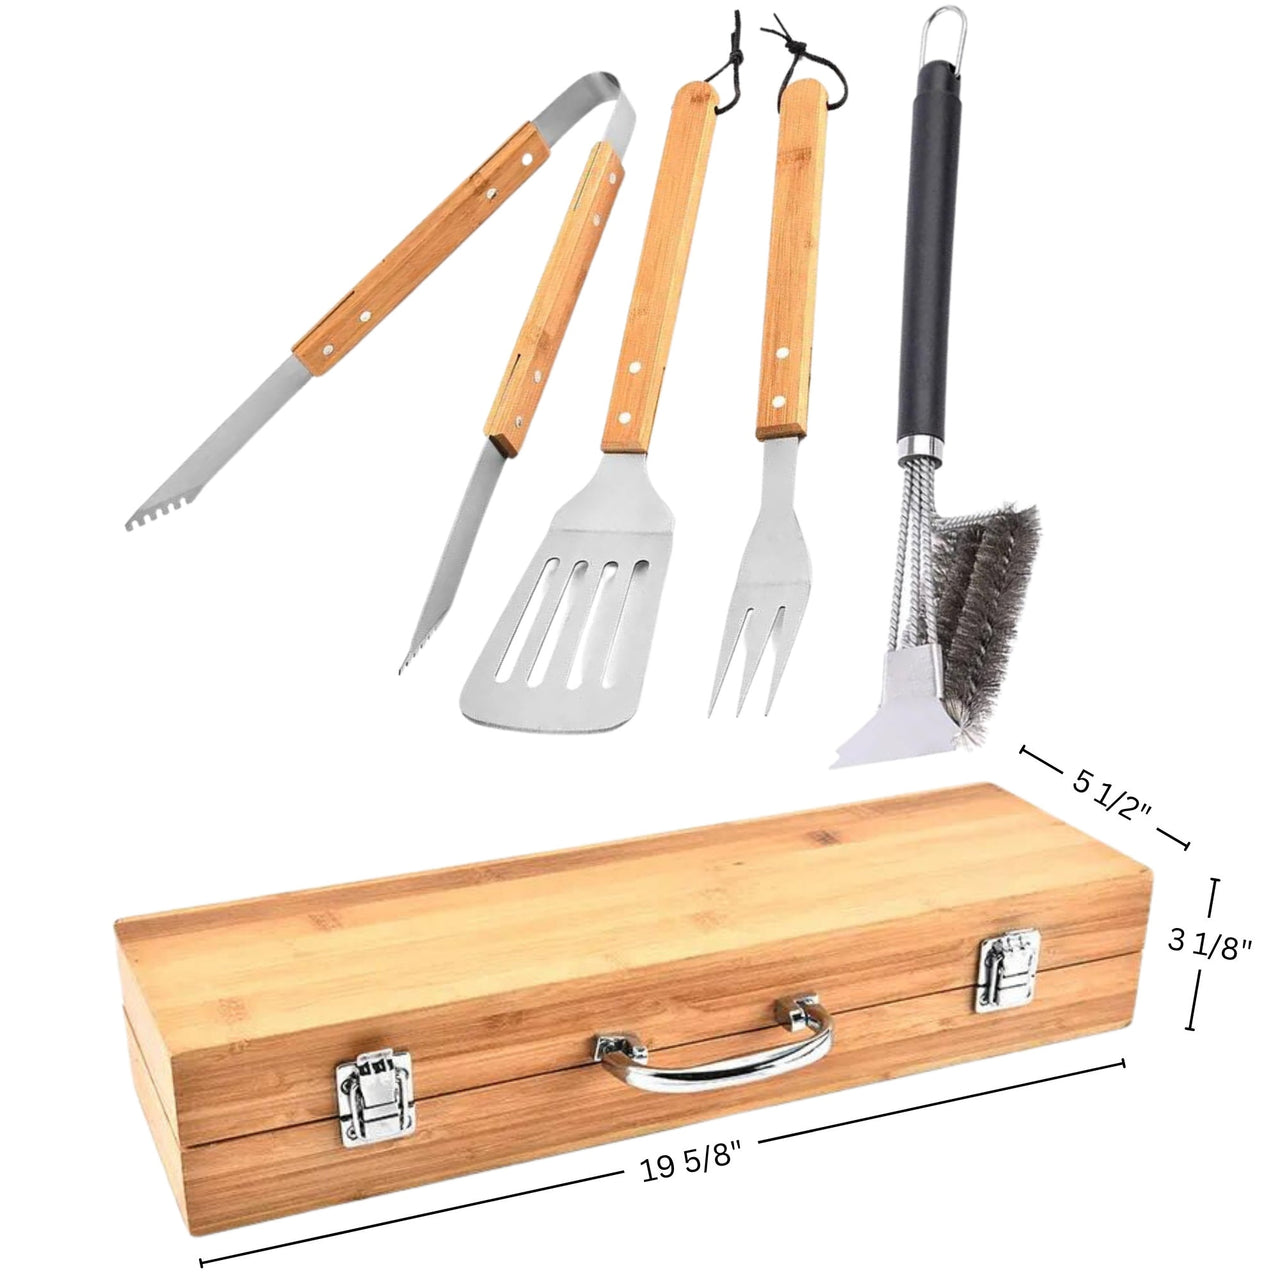 Daddy's Grill Bbq Set for Dad, 3-Piece Bamboo Grilling Tool Set